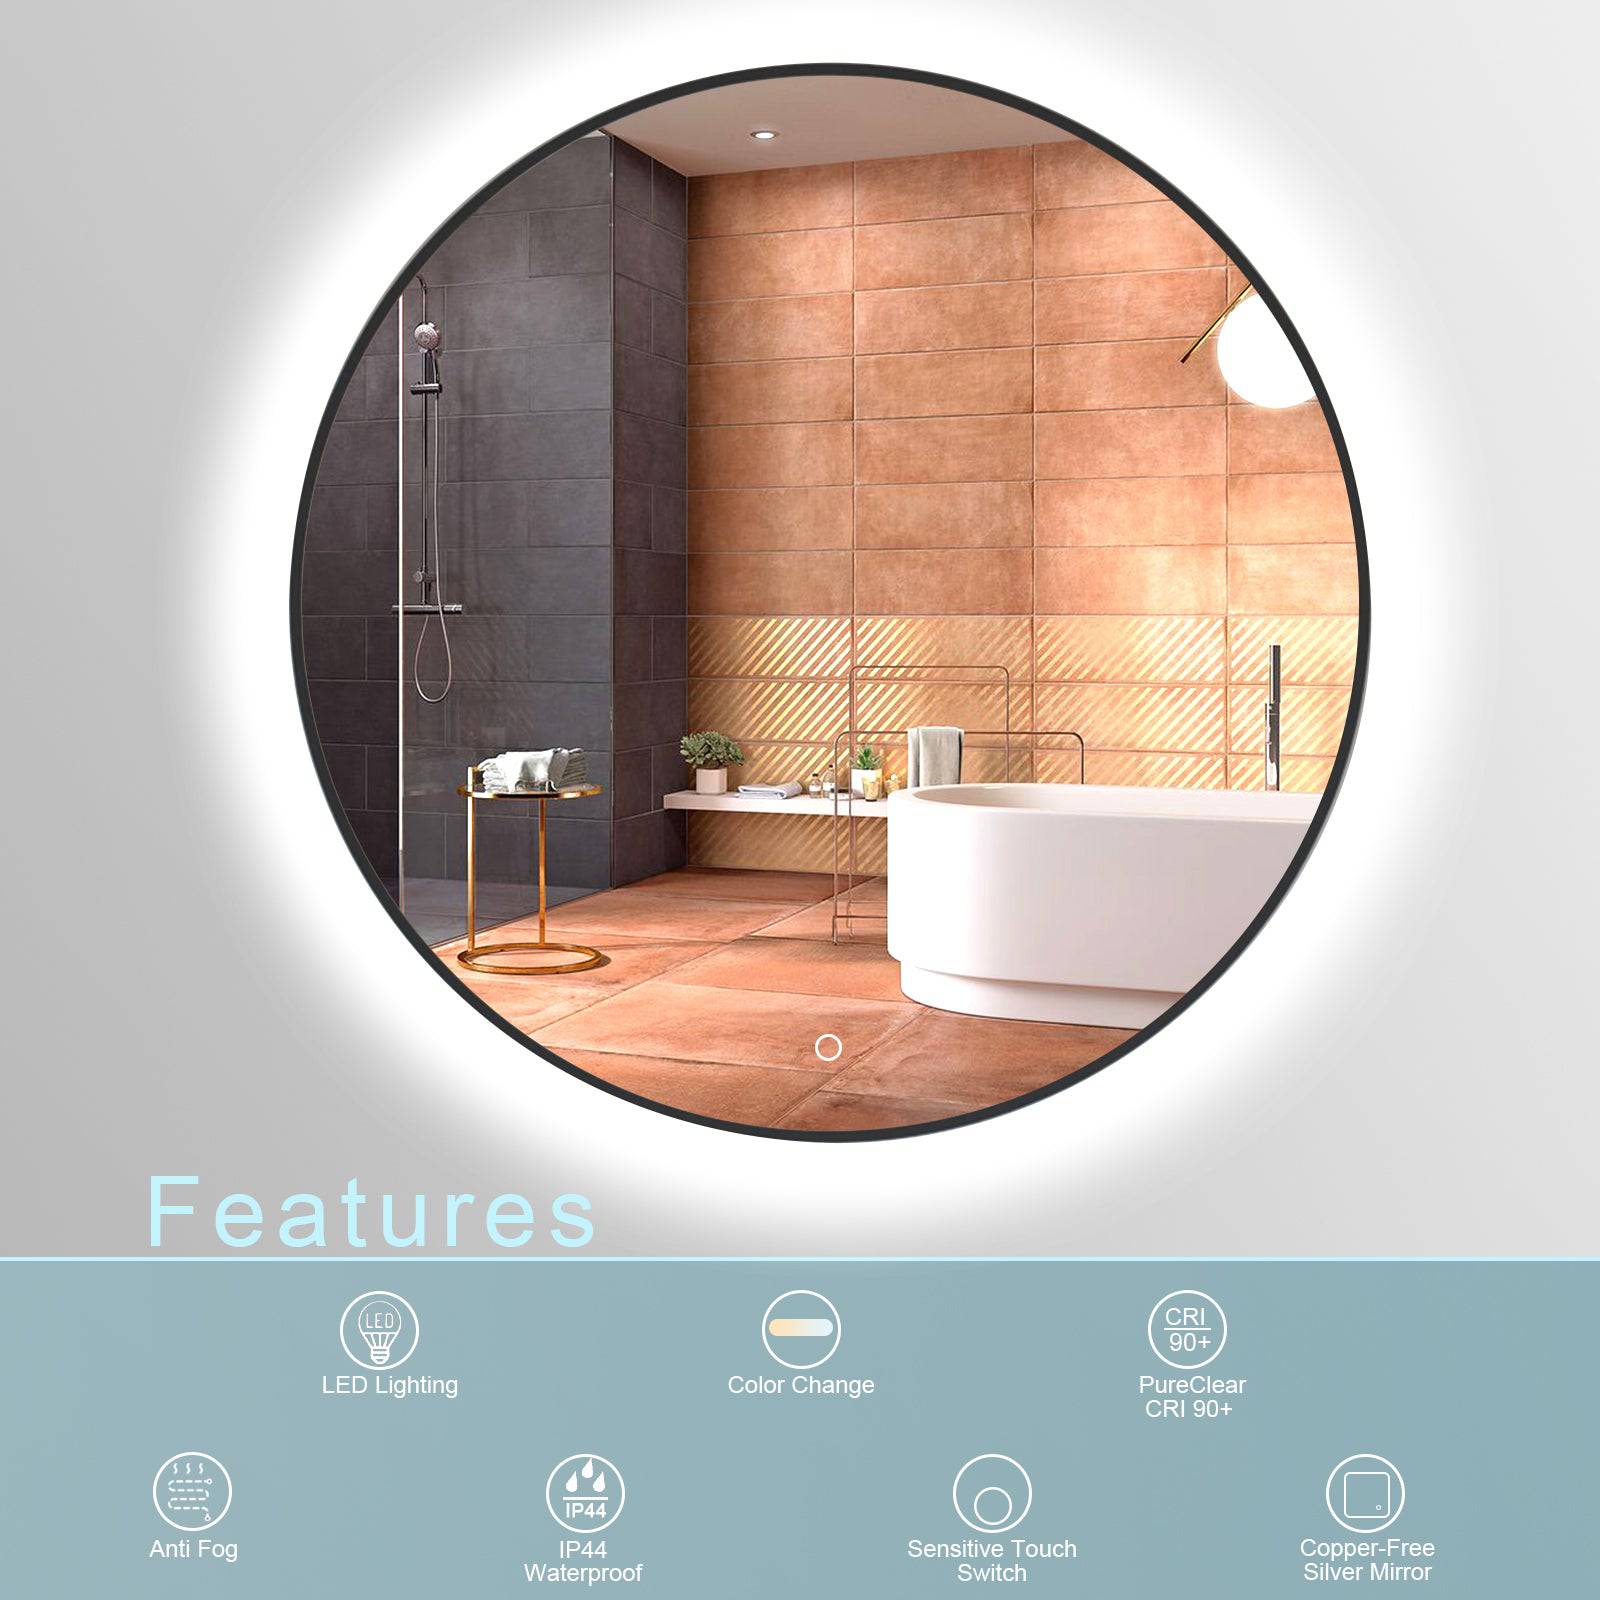 ELL Black Disk Series - Sleek Matt Black LED Mirror with Color Temperature Changing, Heating Pad, Touch Switch - IP44 Rated, Horizontal Mounting - 5mm Copper-Free Glass - Eco LED Lightings 